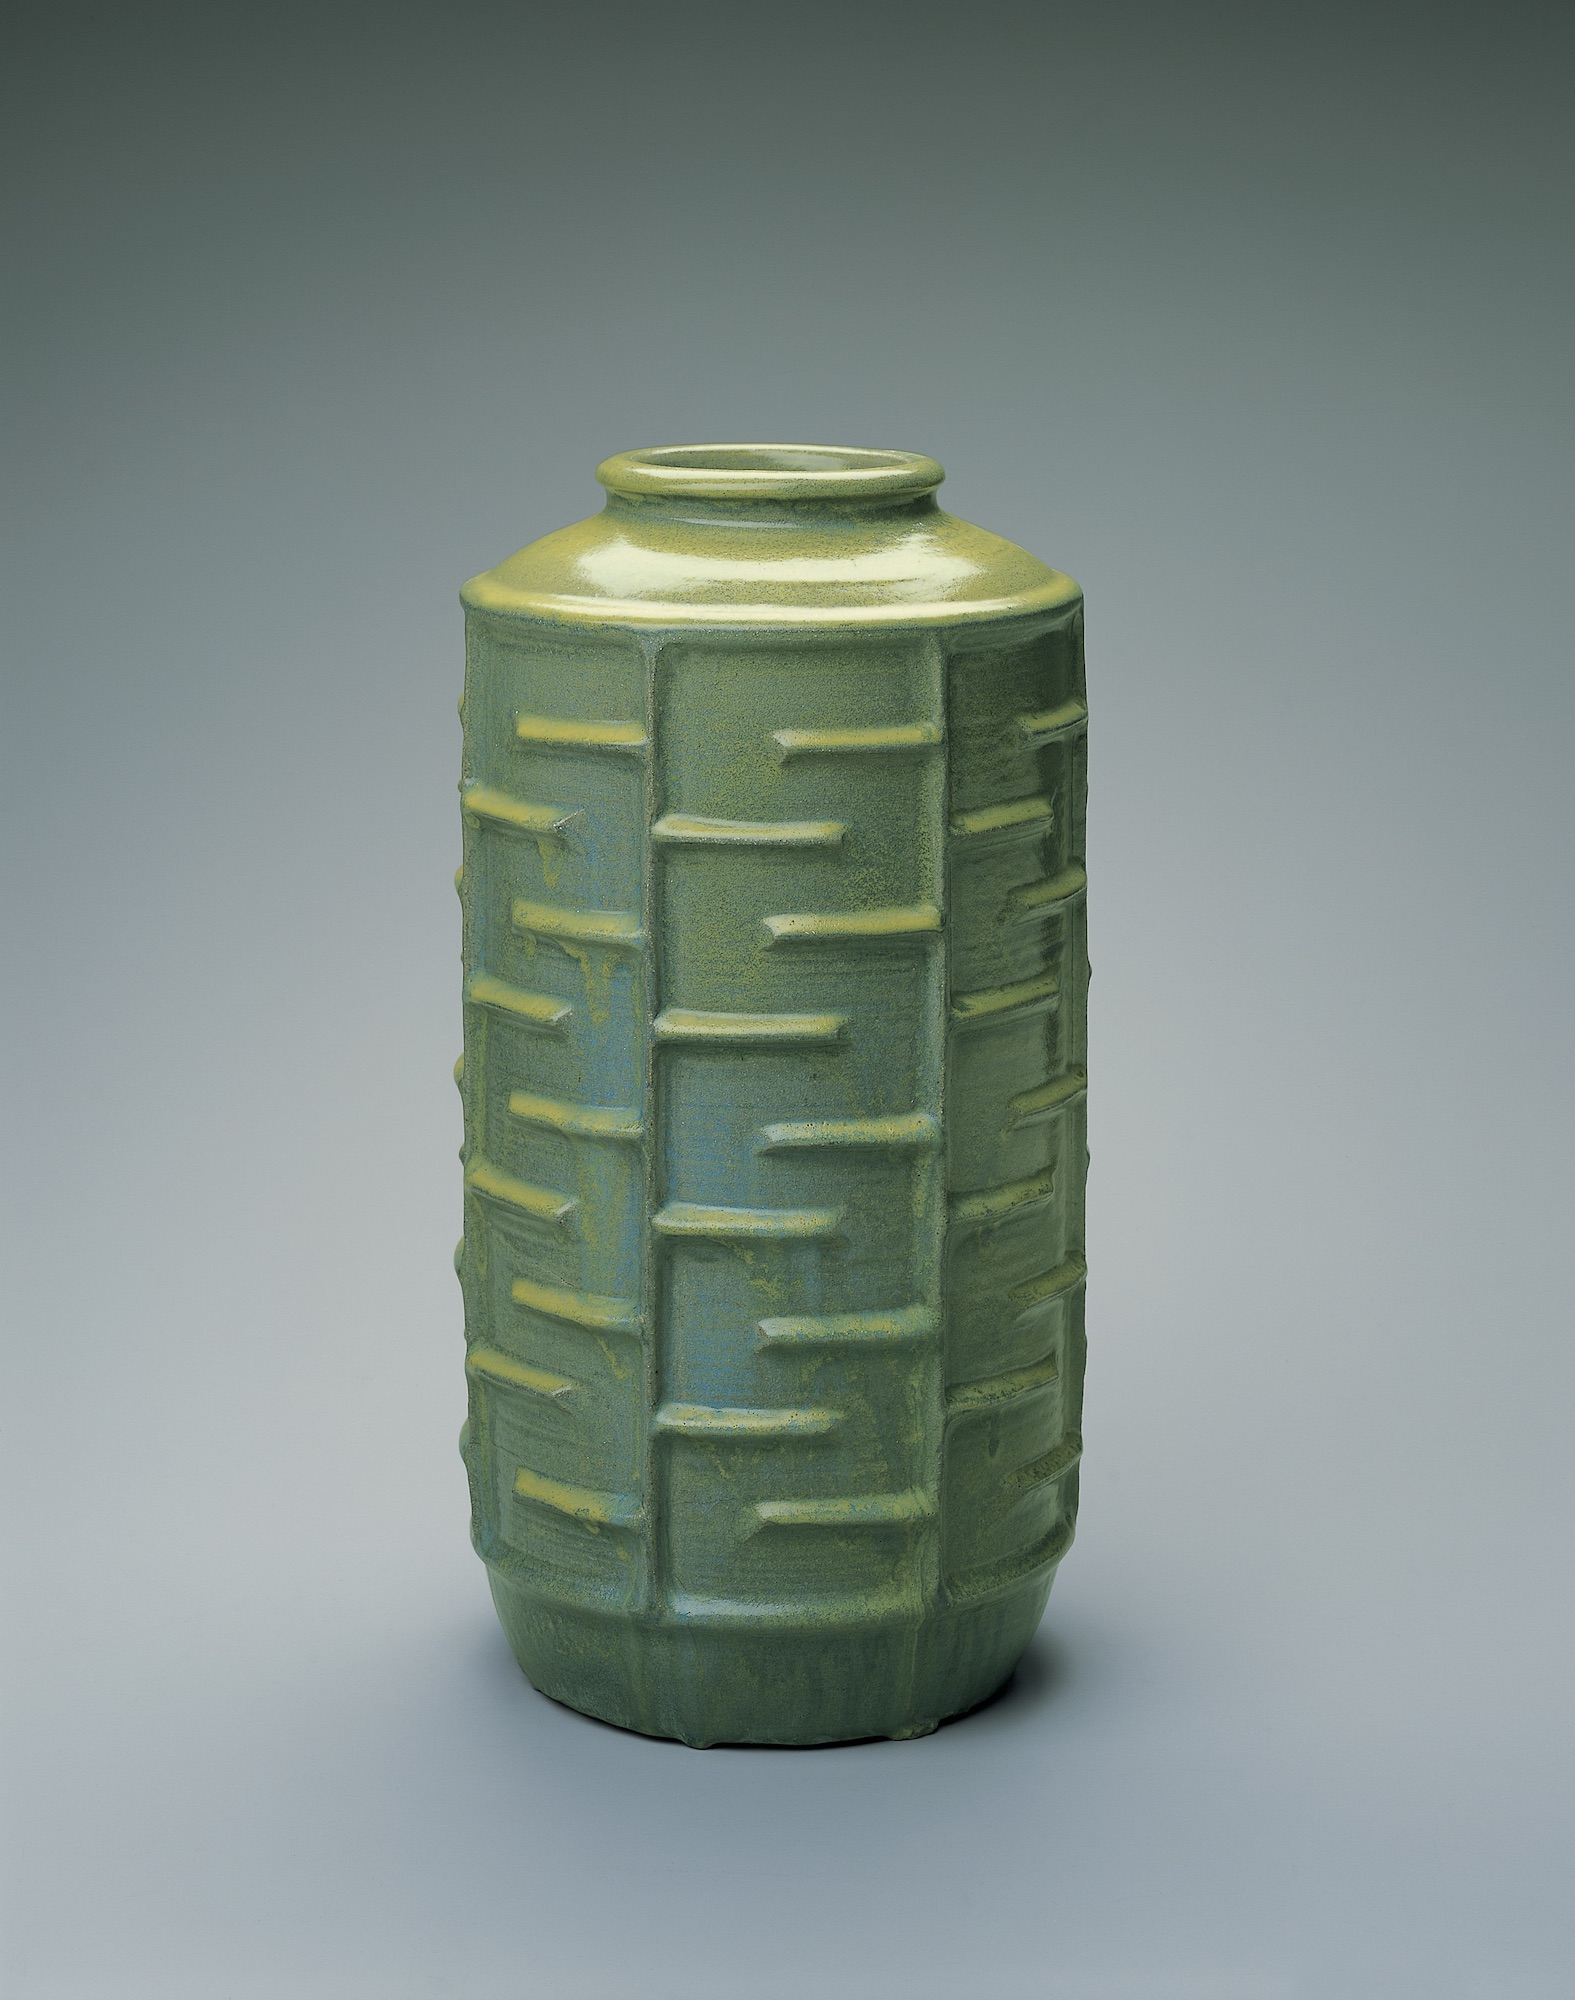 Maija Grotell, vase circa 1942 from Cranbrook Museum of Art collection